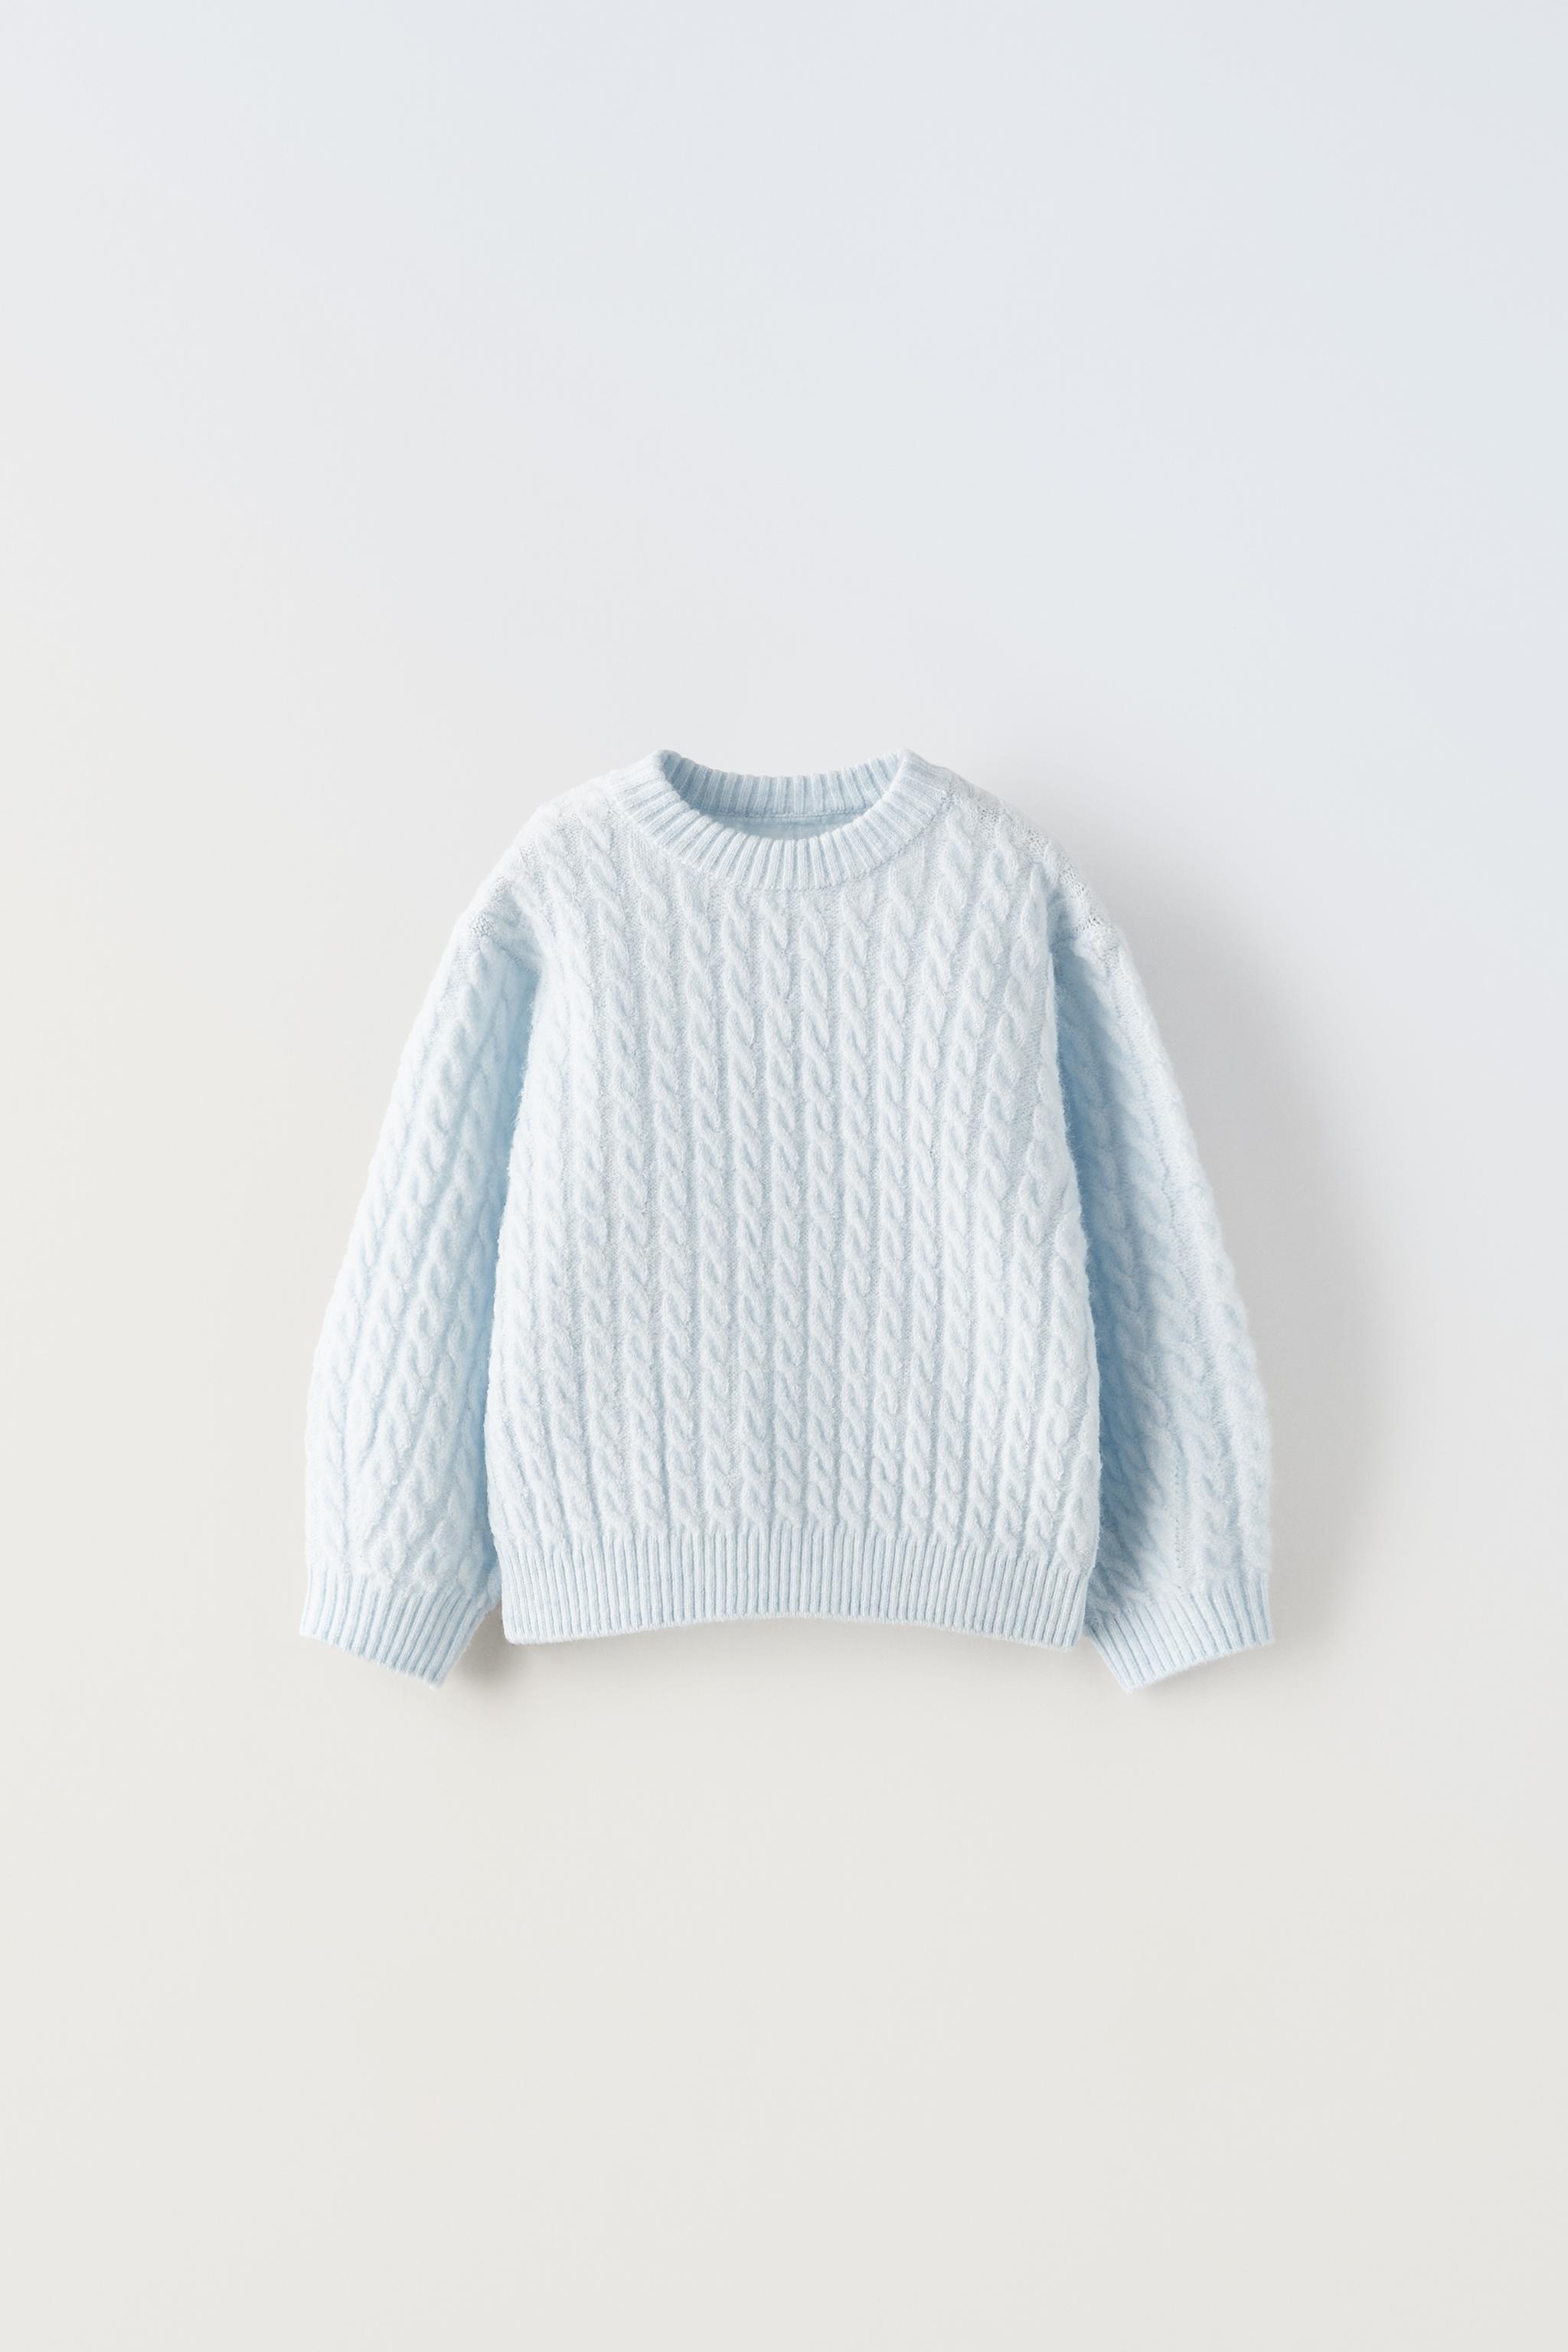 CABLE KNIT SWEATER - Pastel blue | ZARA United States